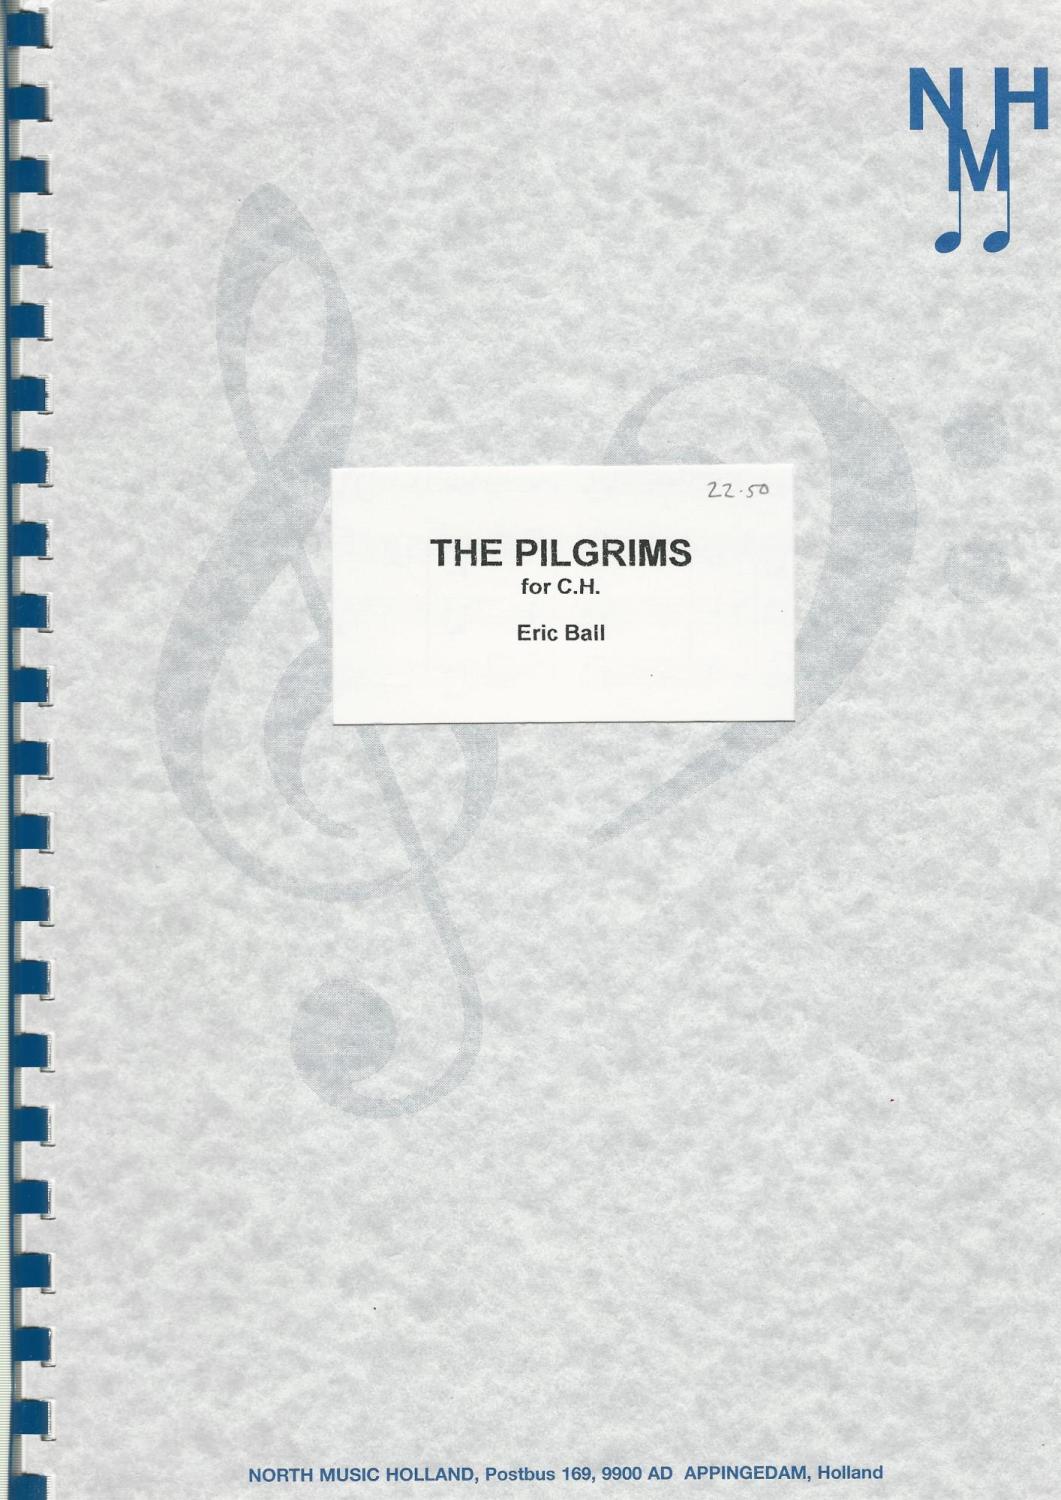 The Pilgrims for C.H. for Brass Band - Eric Ball